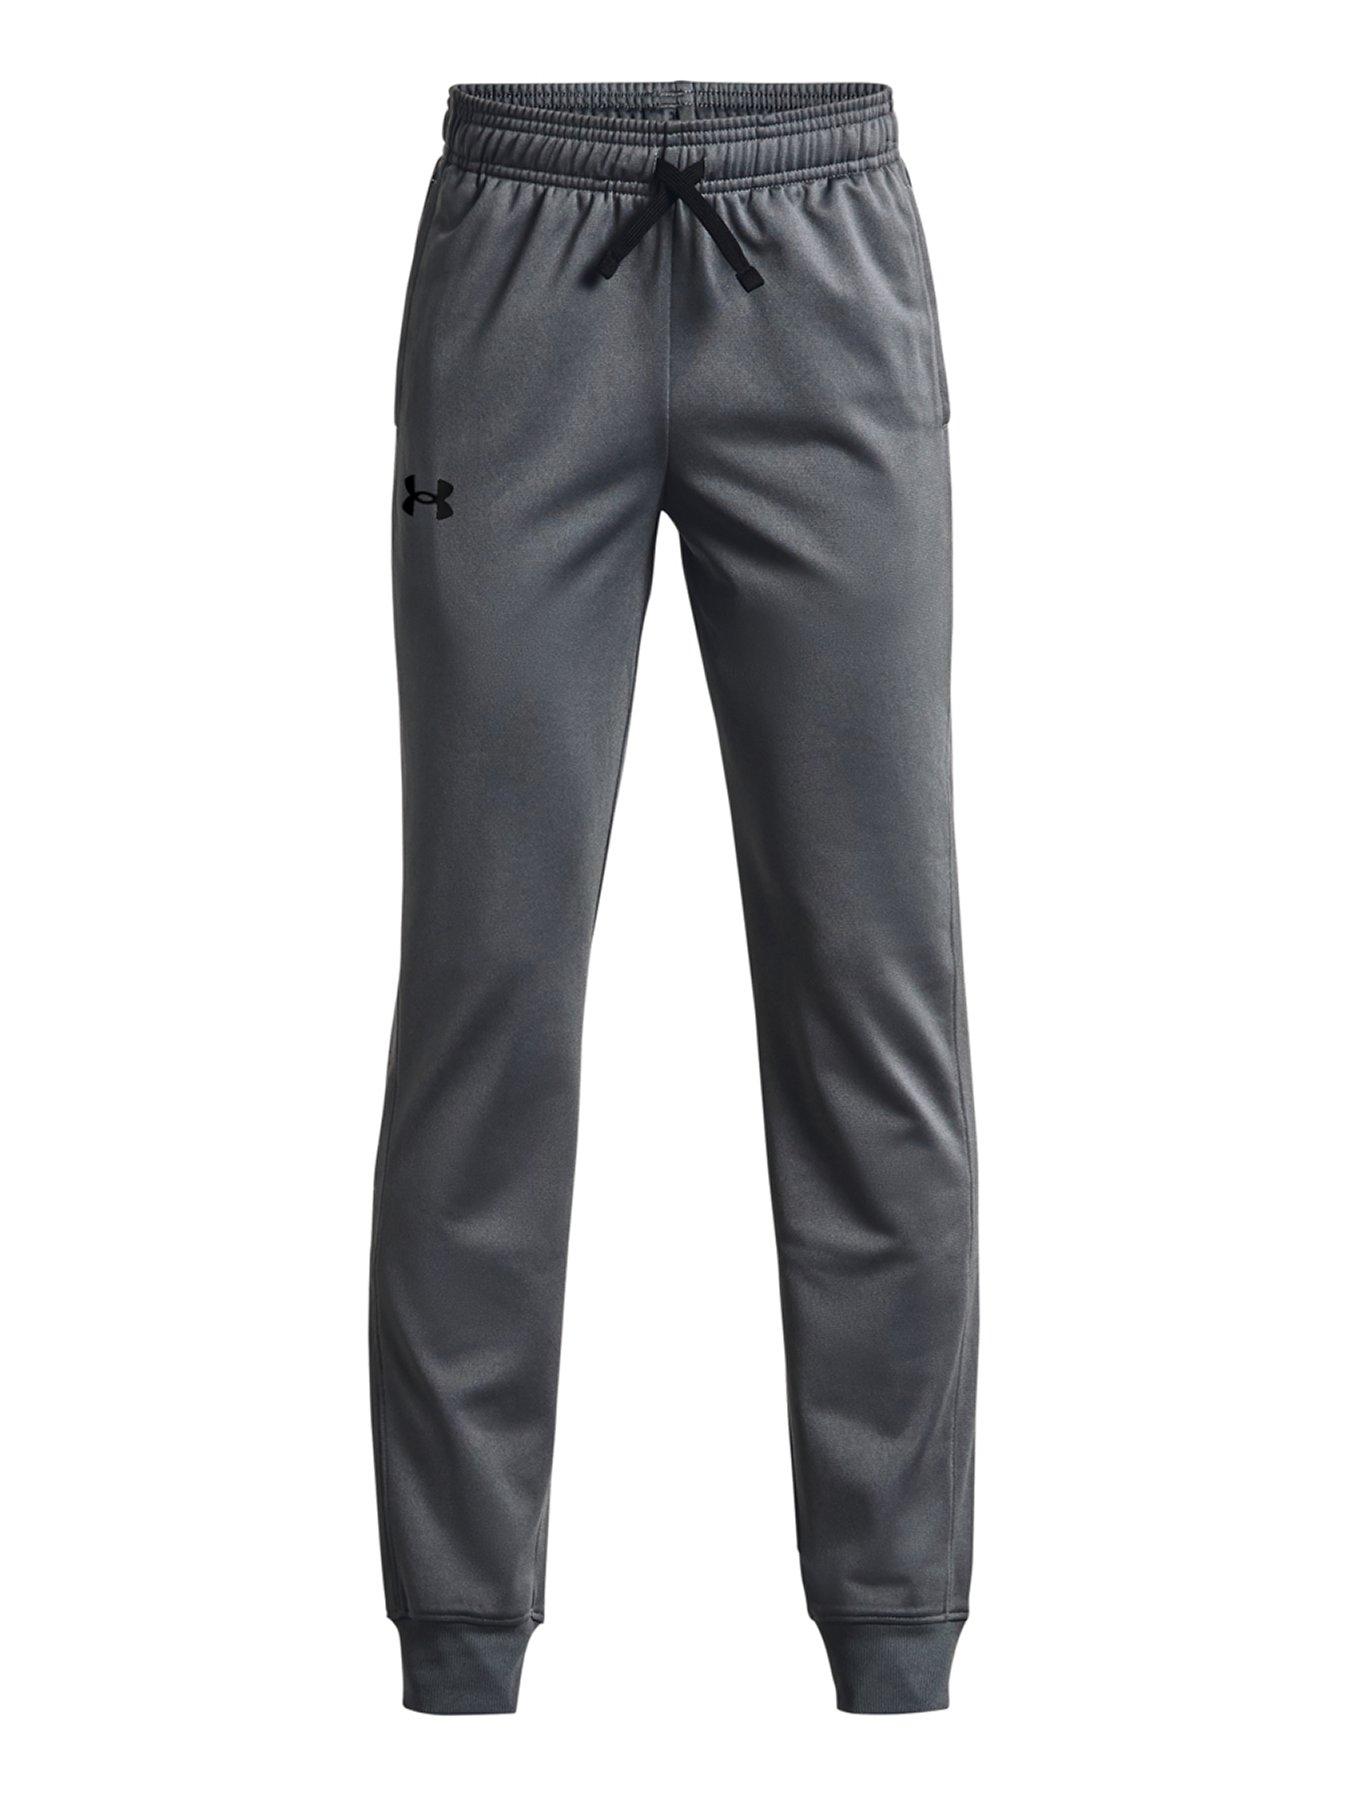 Under Armour, Pants & Jumpsuits, Under Armour Joggers With Sporty Mesh  Side Panels Size Medium Short